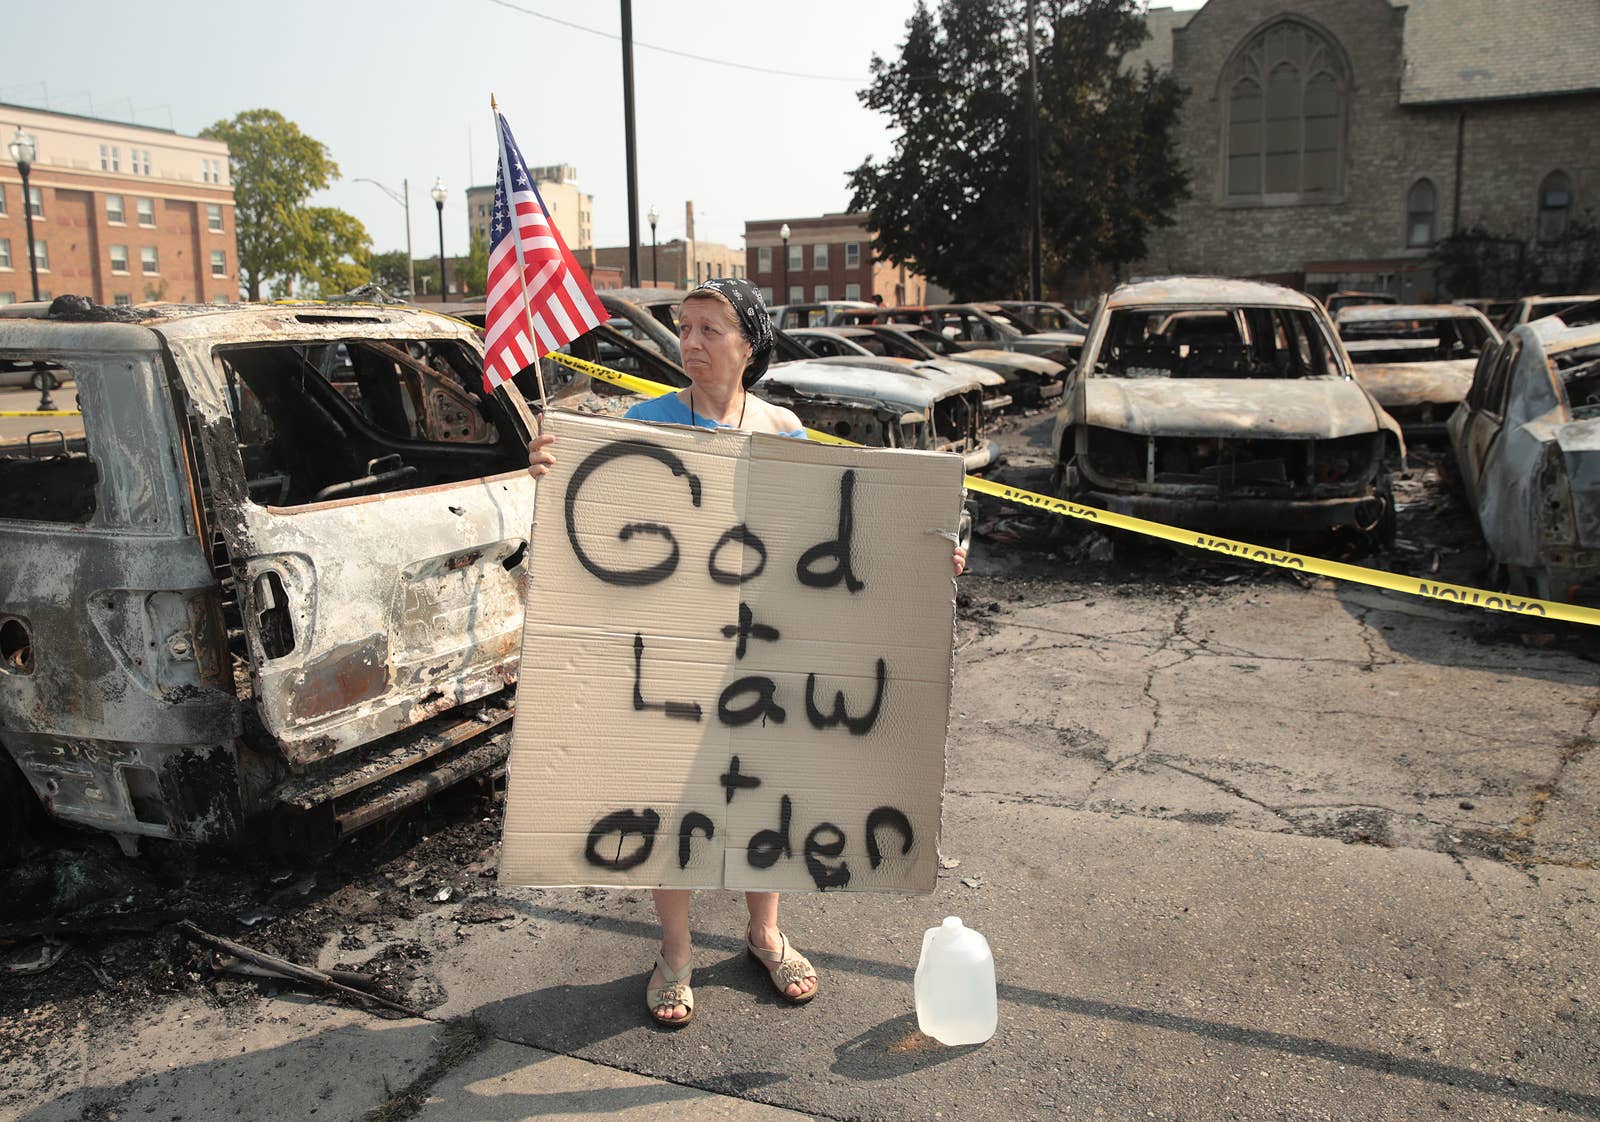 A woman holds a small American flag and a cardboard sign that says god + law + order